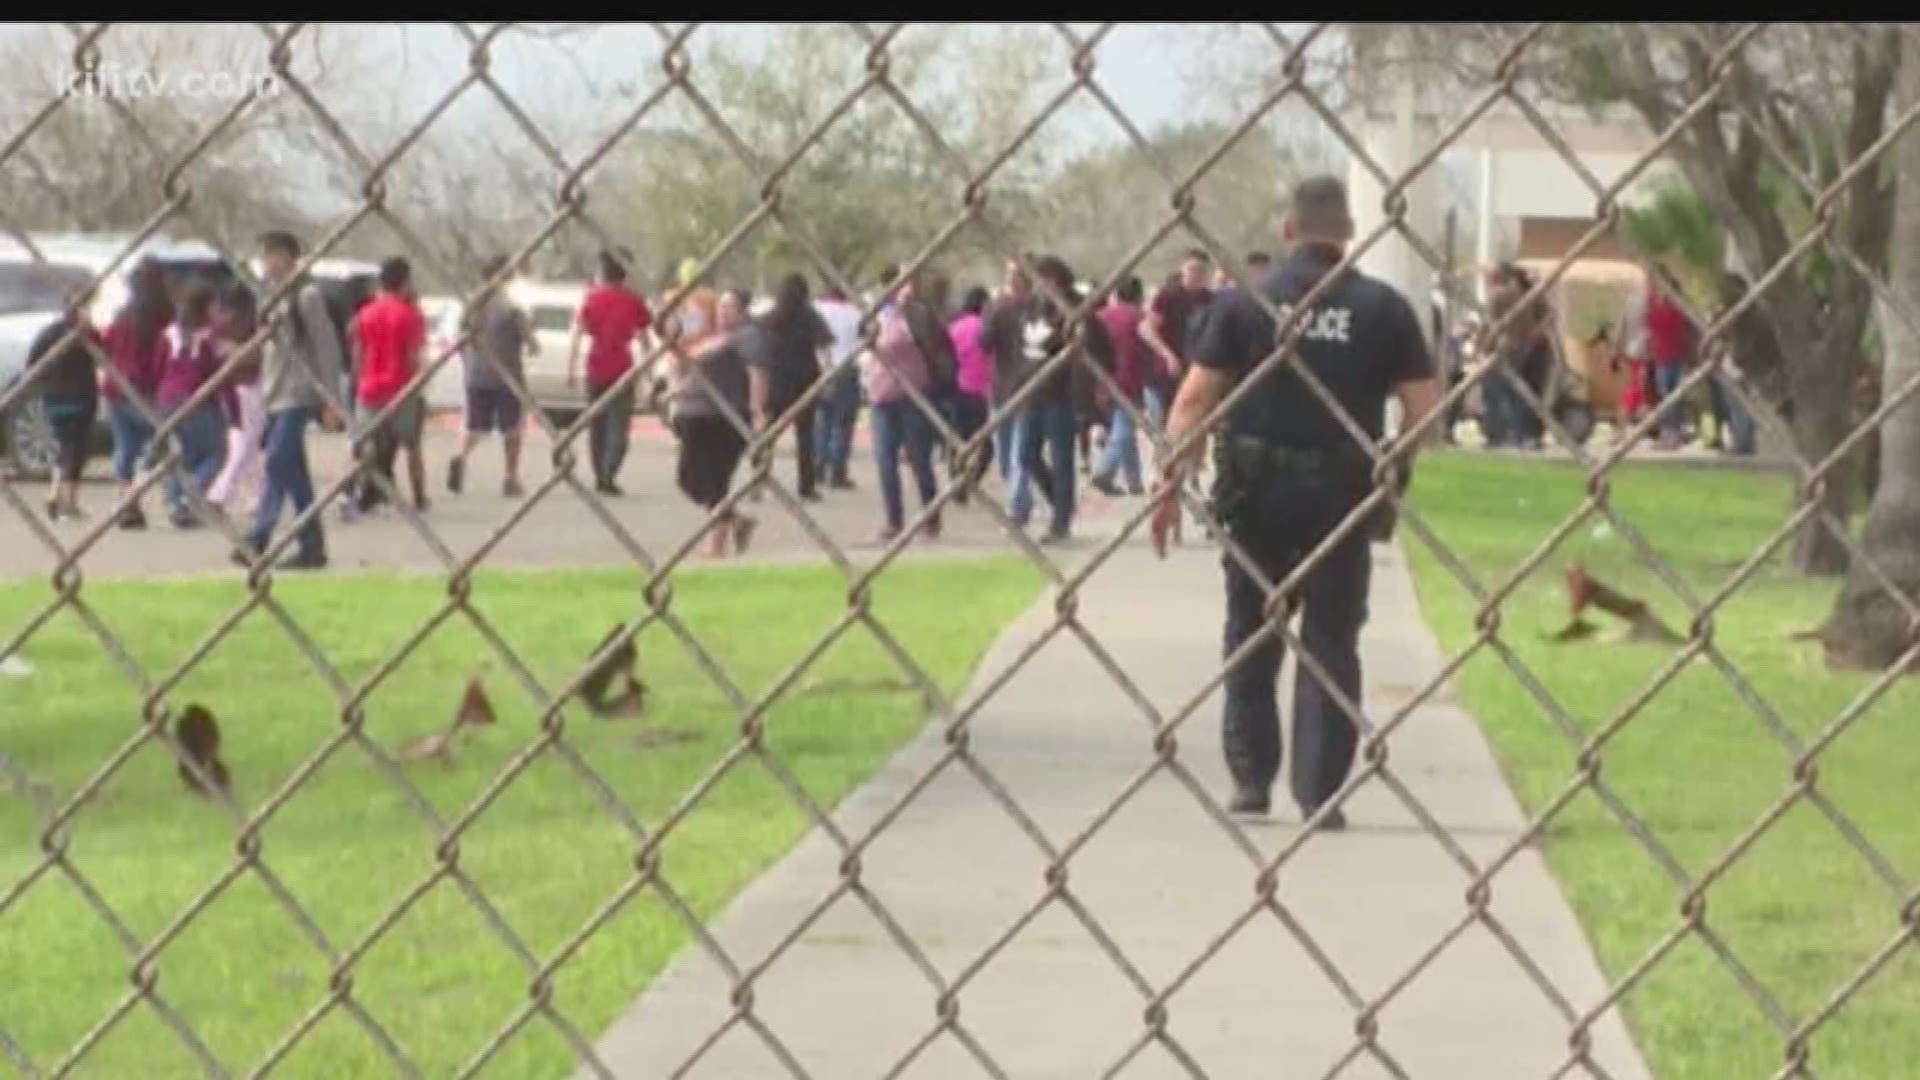 A lockdown at the Robstown Early College High School sparked plenty of concern Tuesday from Coastal Bend residents.